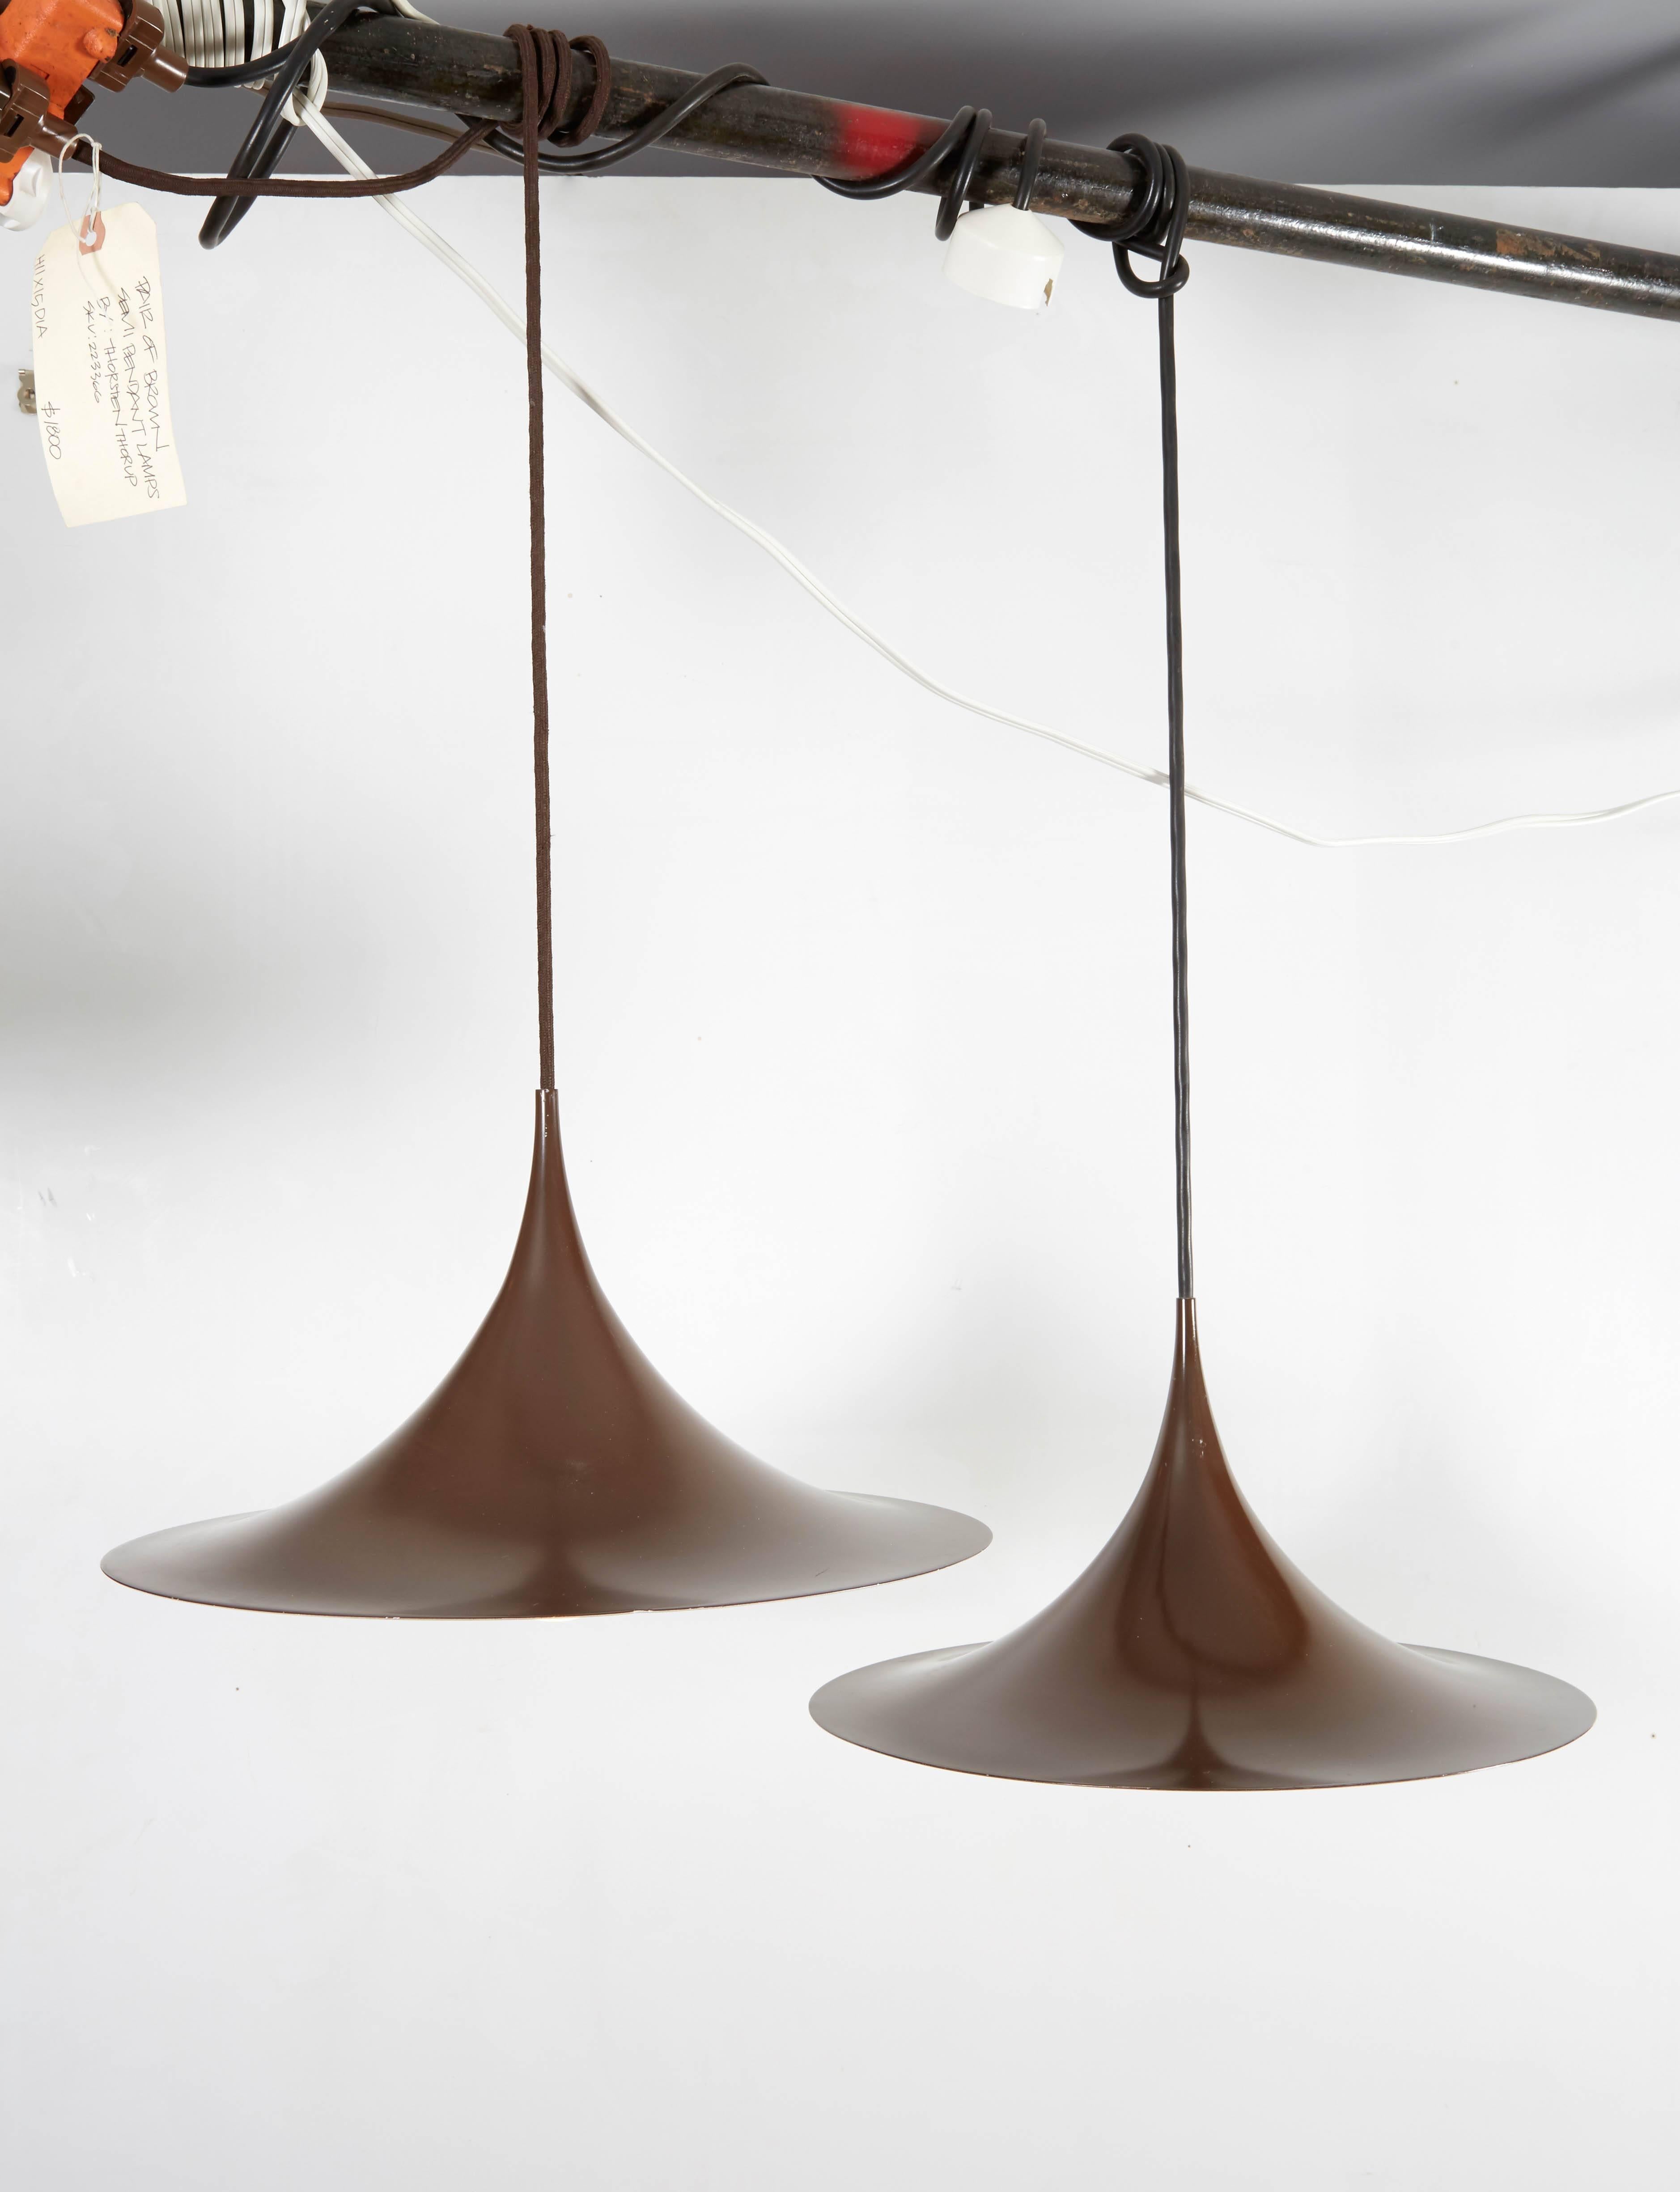 Vintage 1960s Fog & Morup Pendent Lamps 

These brown midcentury pendent lamps tare in excellent condition. The brown fits into any home is a very elegant but understated way. Excellent for a kitchen, entry, hallway, or dining room. Ready for